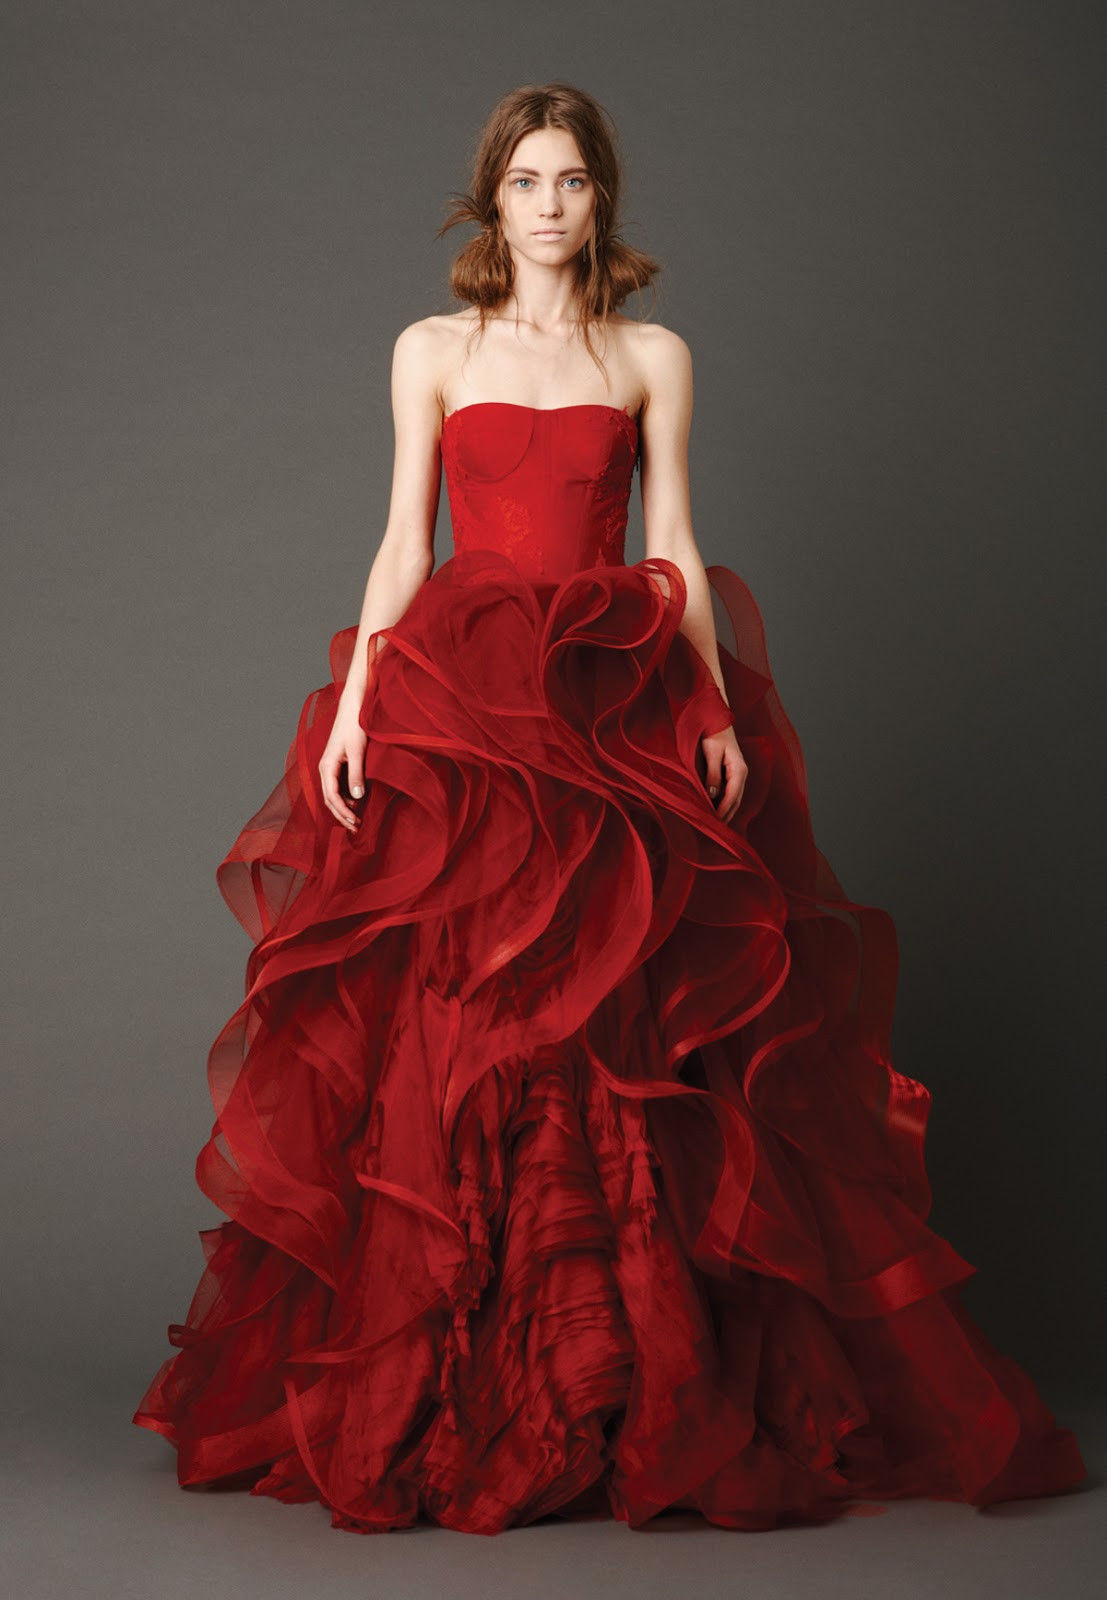 Red Wedding Gowns
 DressyBridal Learn Wedding Dresses 2013 Trends from Vera